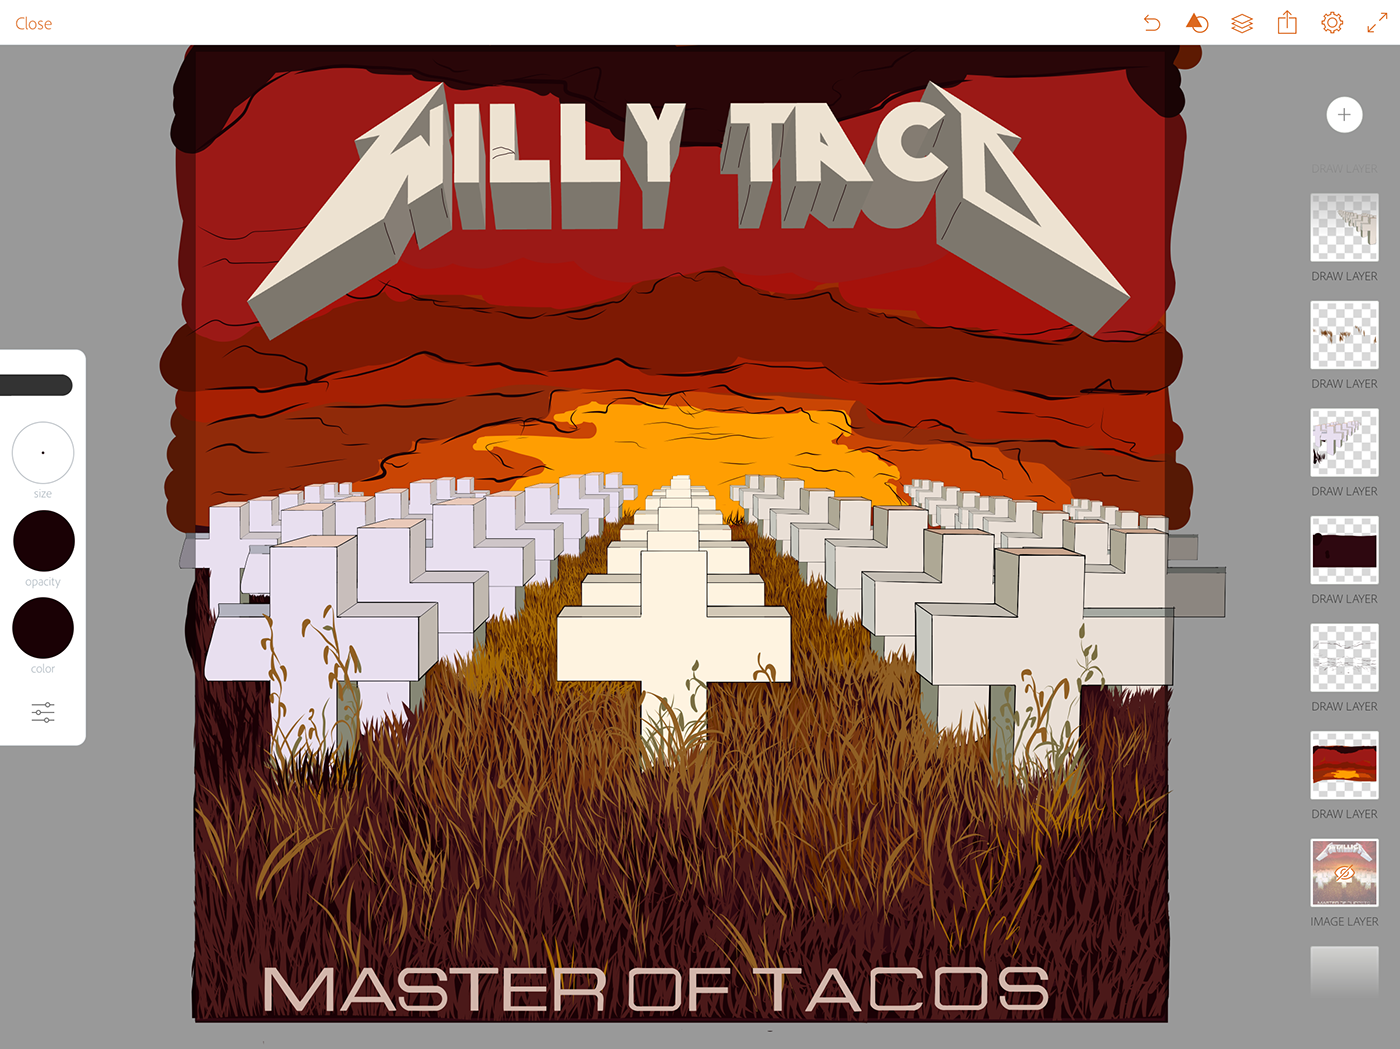 Willy Tacos master of puppets Master of Tacos merch design Tacos shirt designs graphic design  art